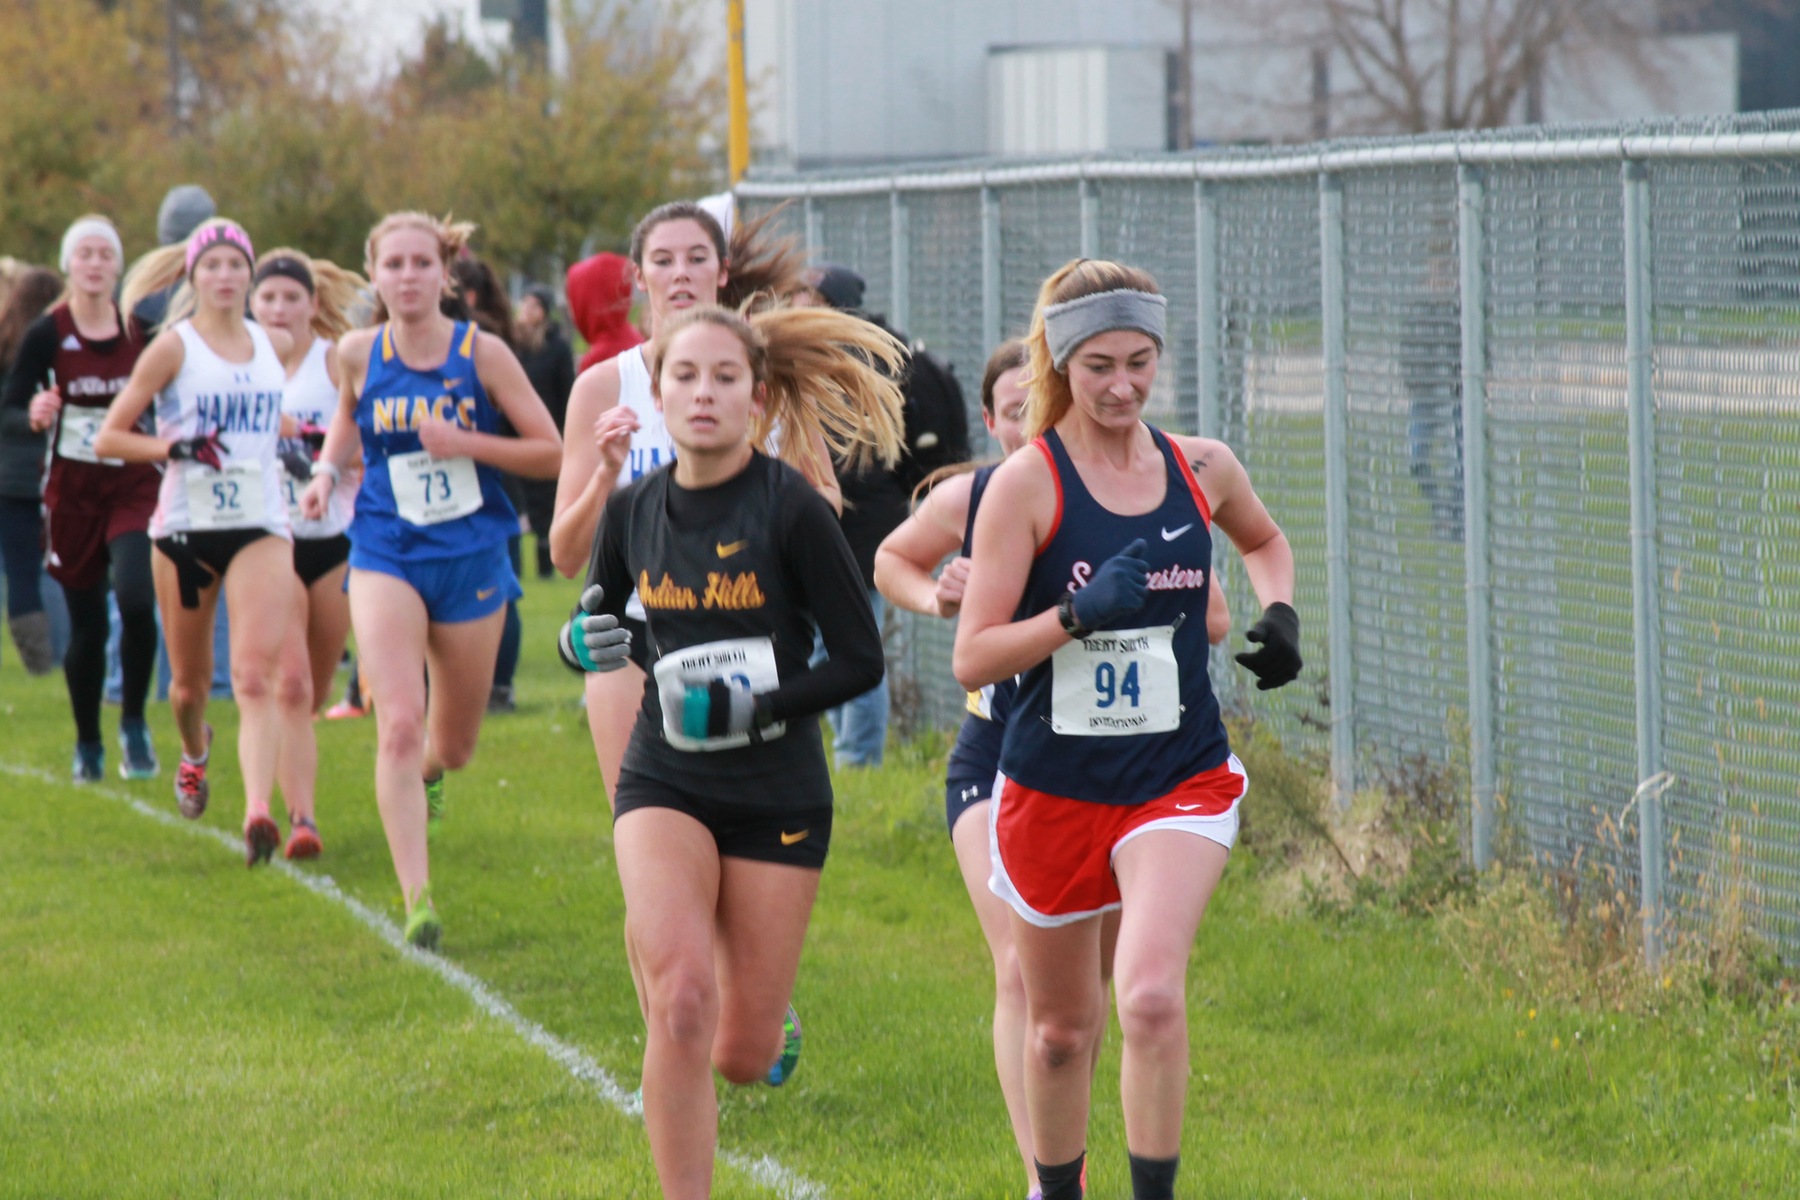 Kaylee Ford paced the Warriors again this weekend at the Trent Smith Invite with a 13th place finish.